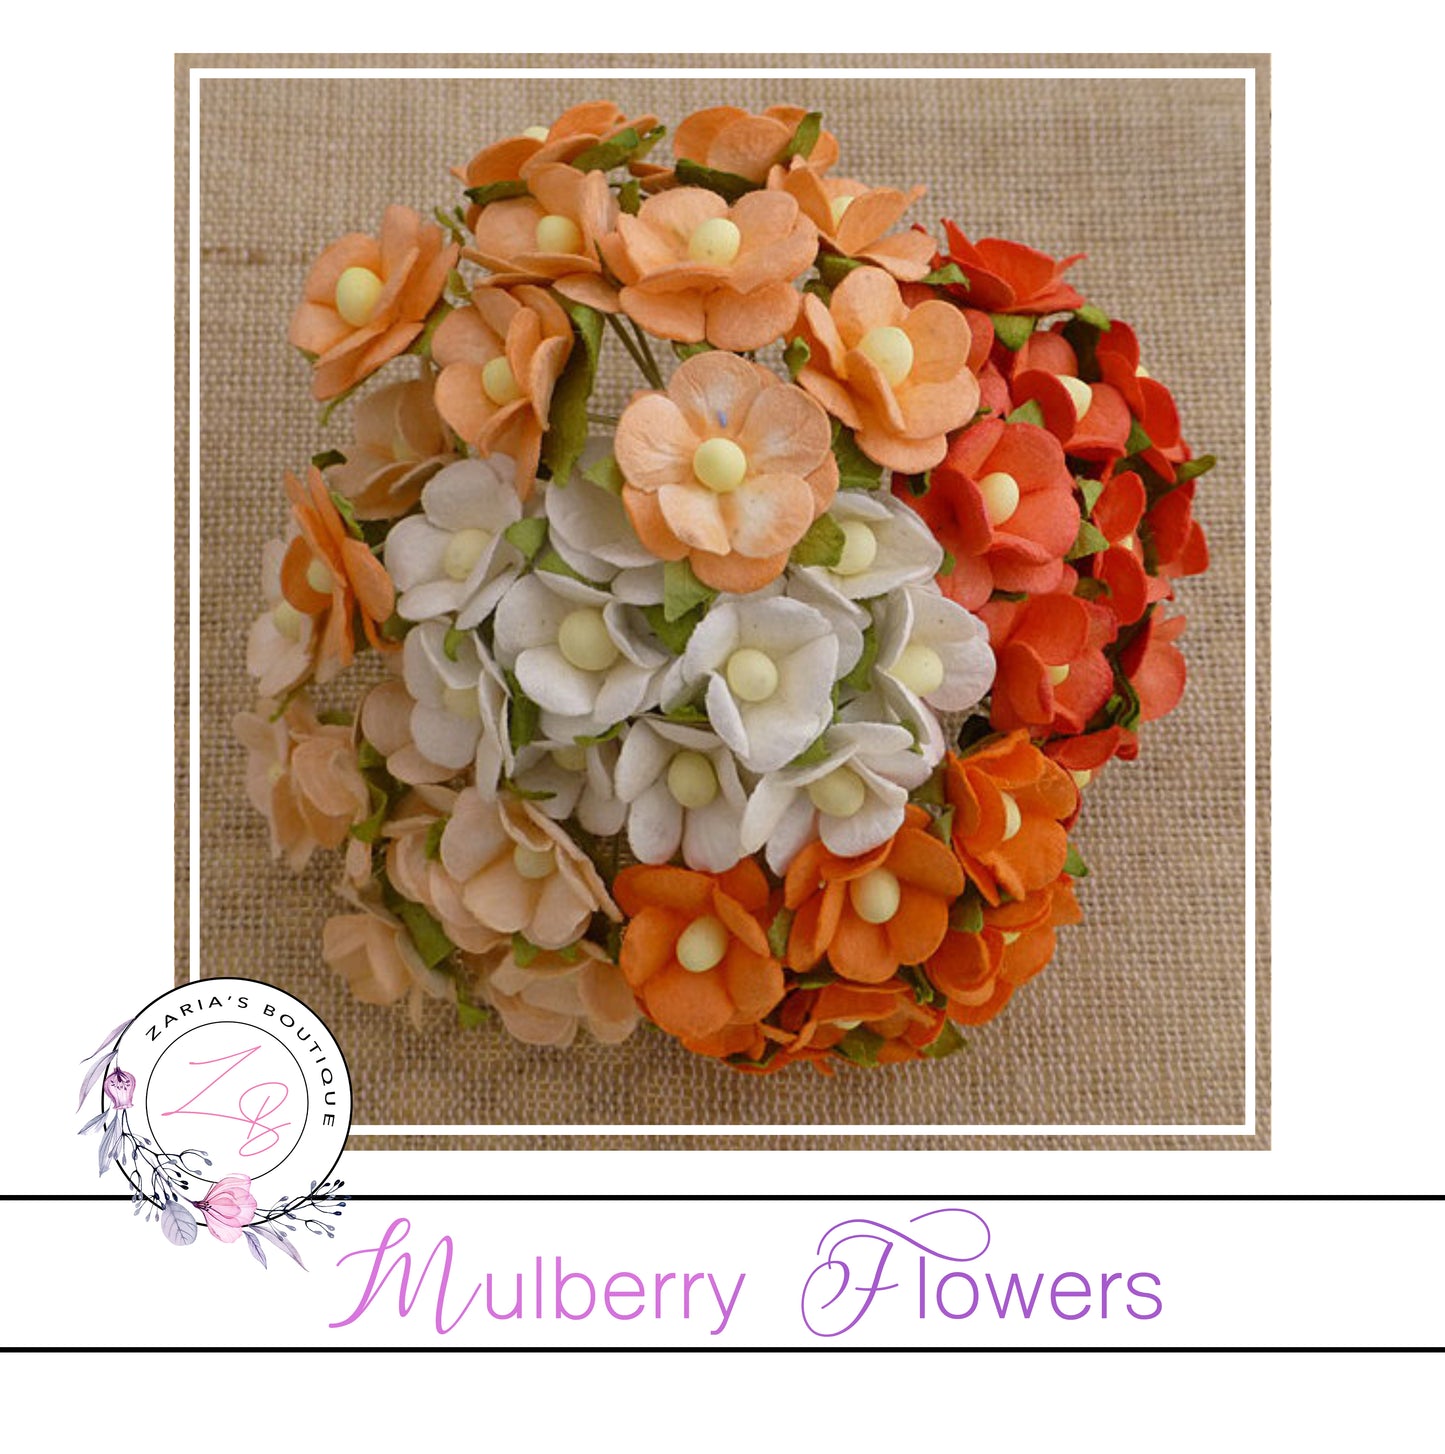 Mulberry Flowers ~ Sweetheart Blossom ~ Peach/Orange/White Mix ~ 15mm